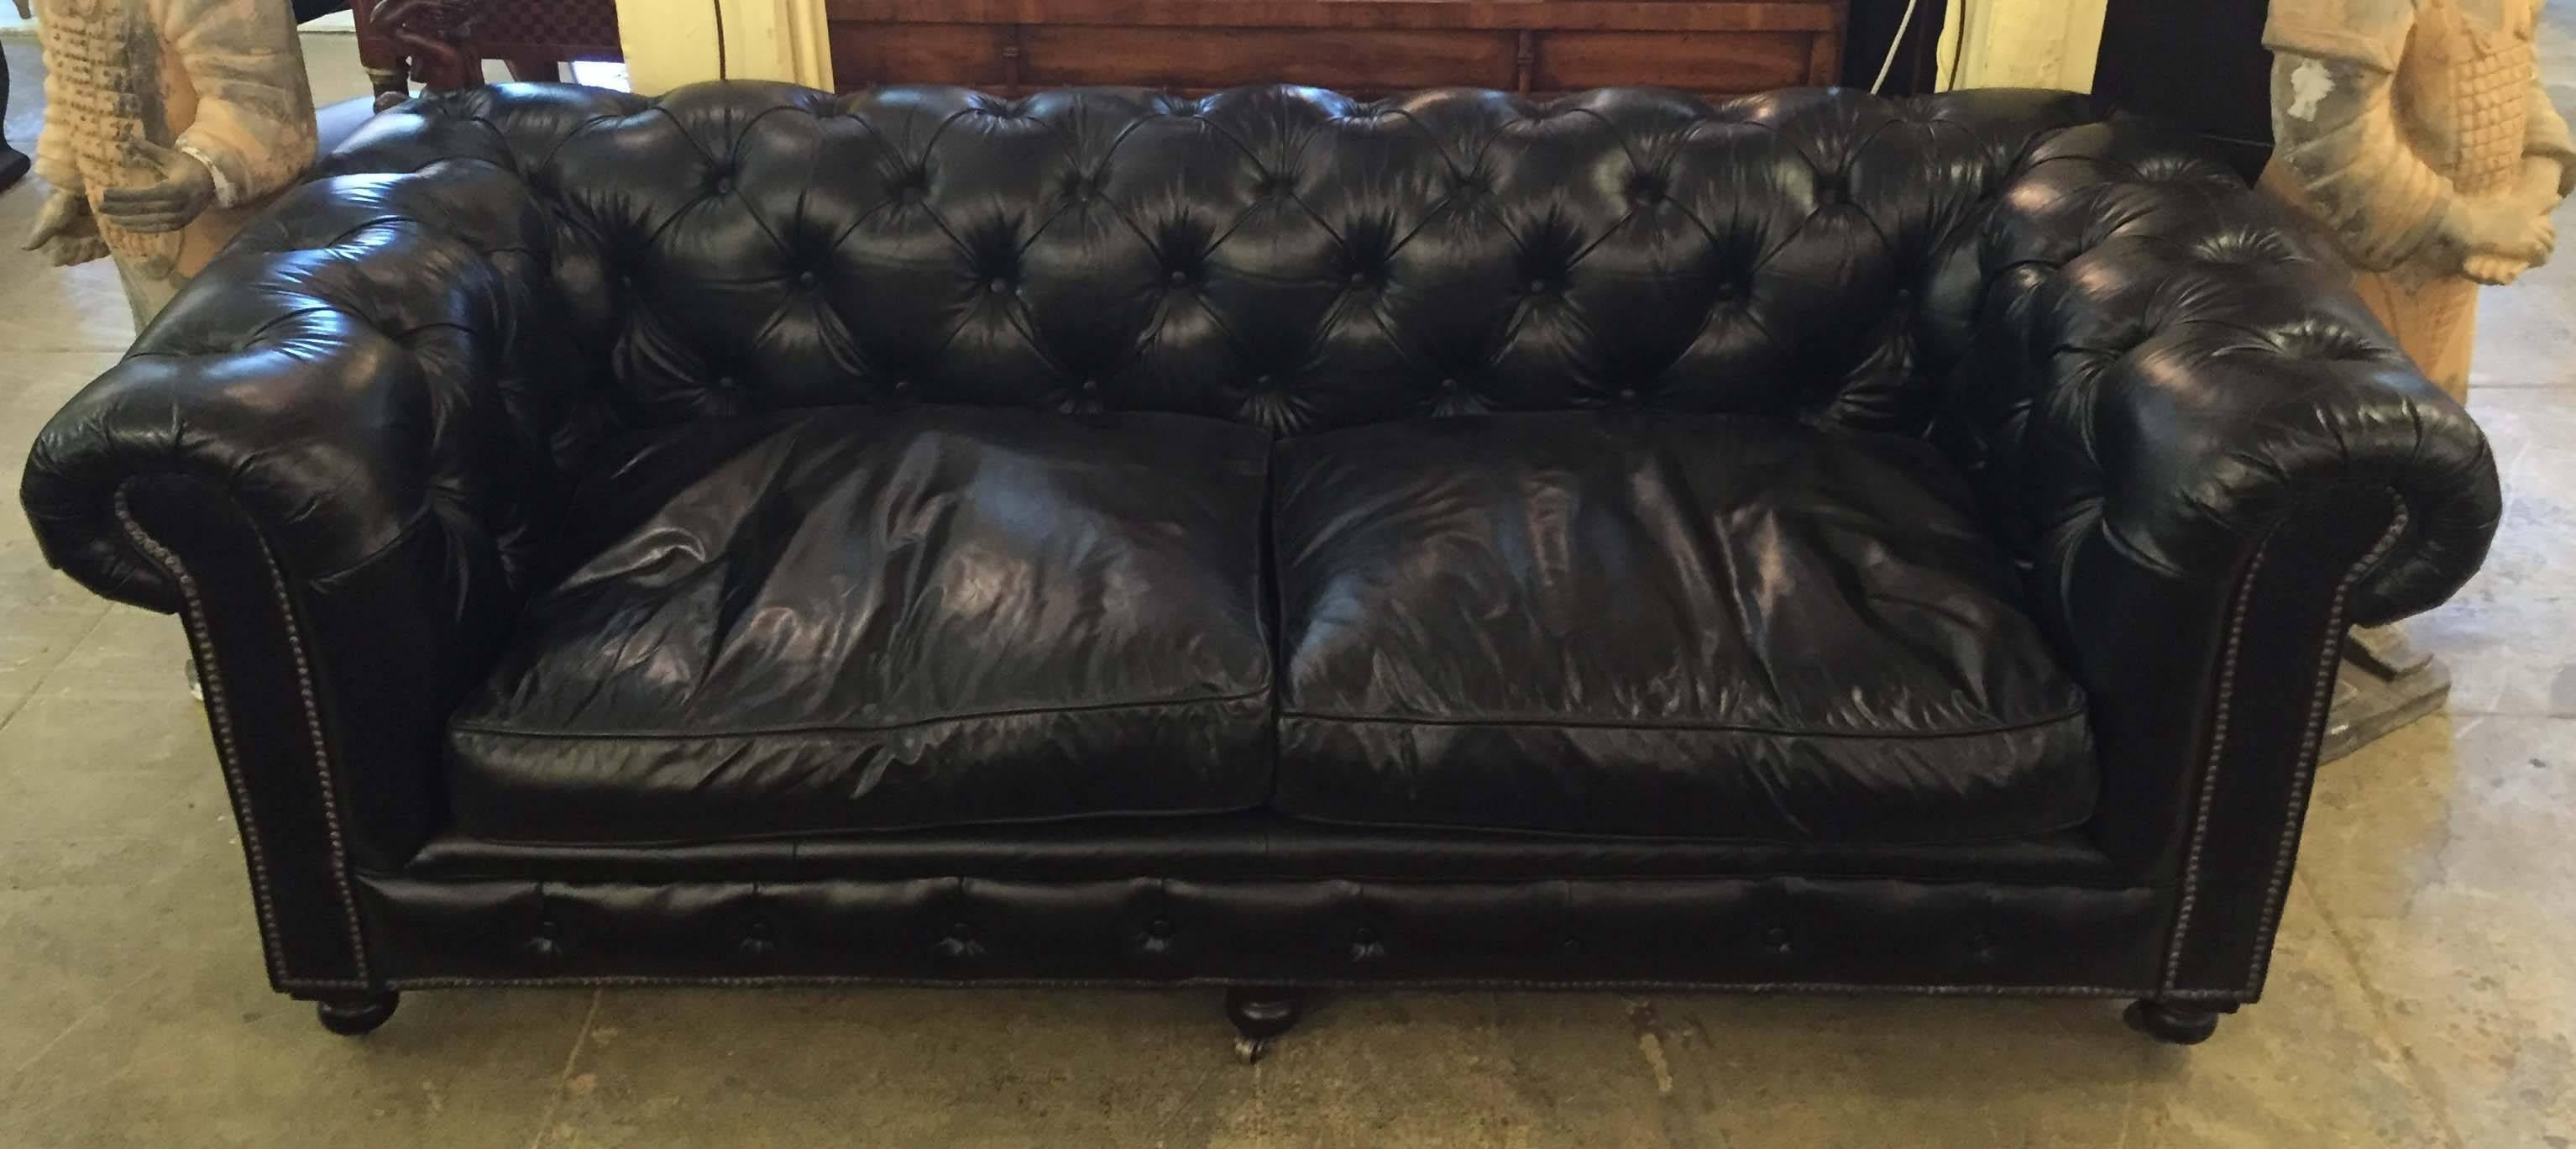 A large Ralph Lauren black leather tufted cigar couch.

The couch is all original including the wheels and is very comfortable. It has been cleaned and since then no one is allowed to sit on it. In some photos the couch might look brown due to the